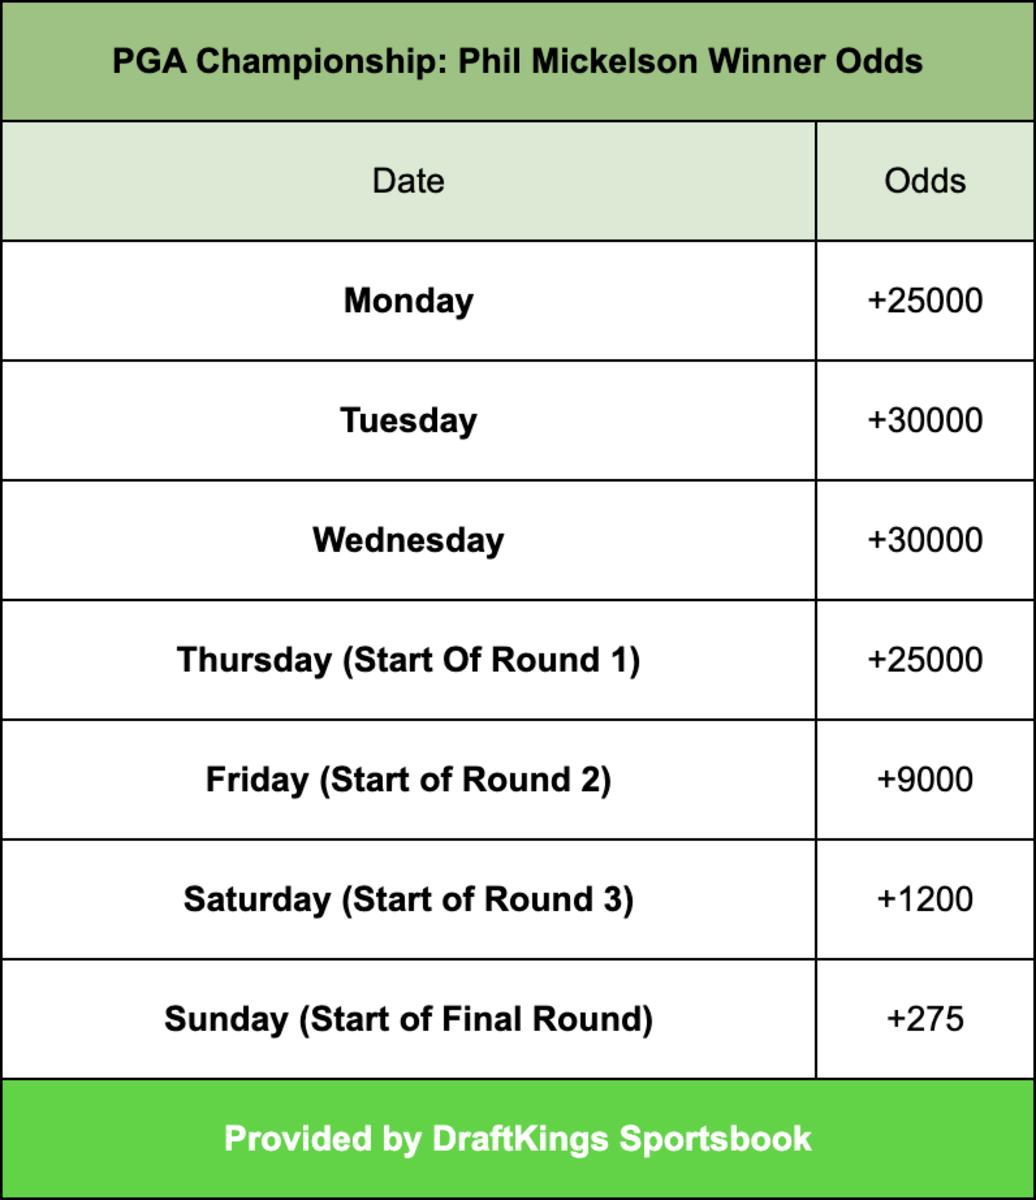 Photo: us open championship odds